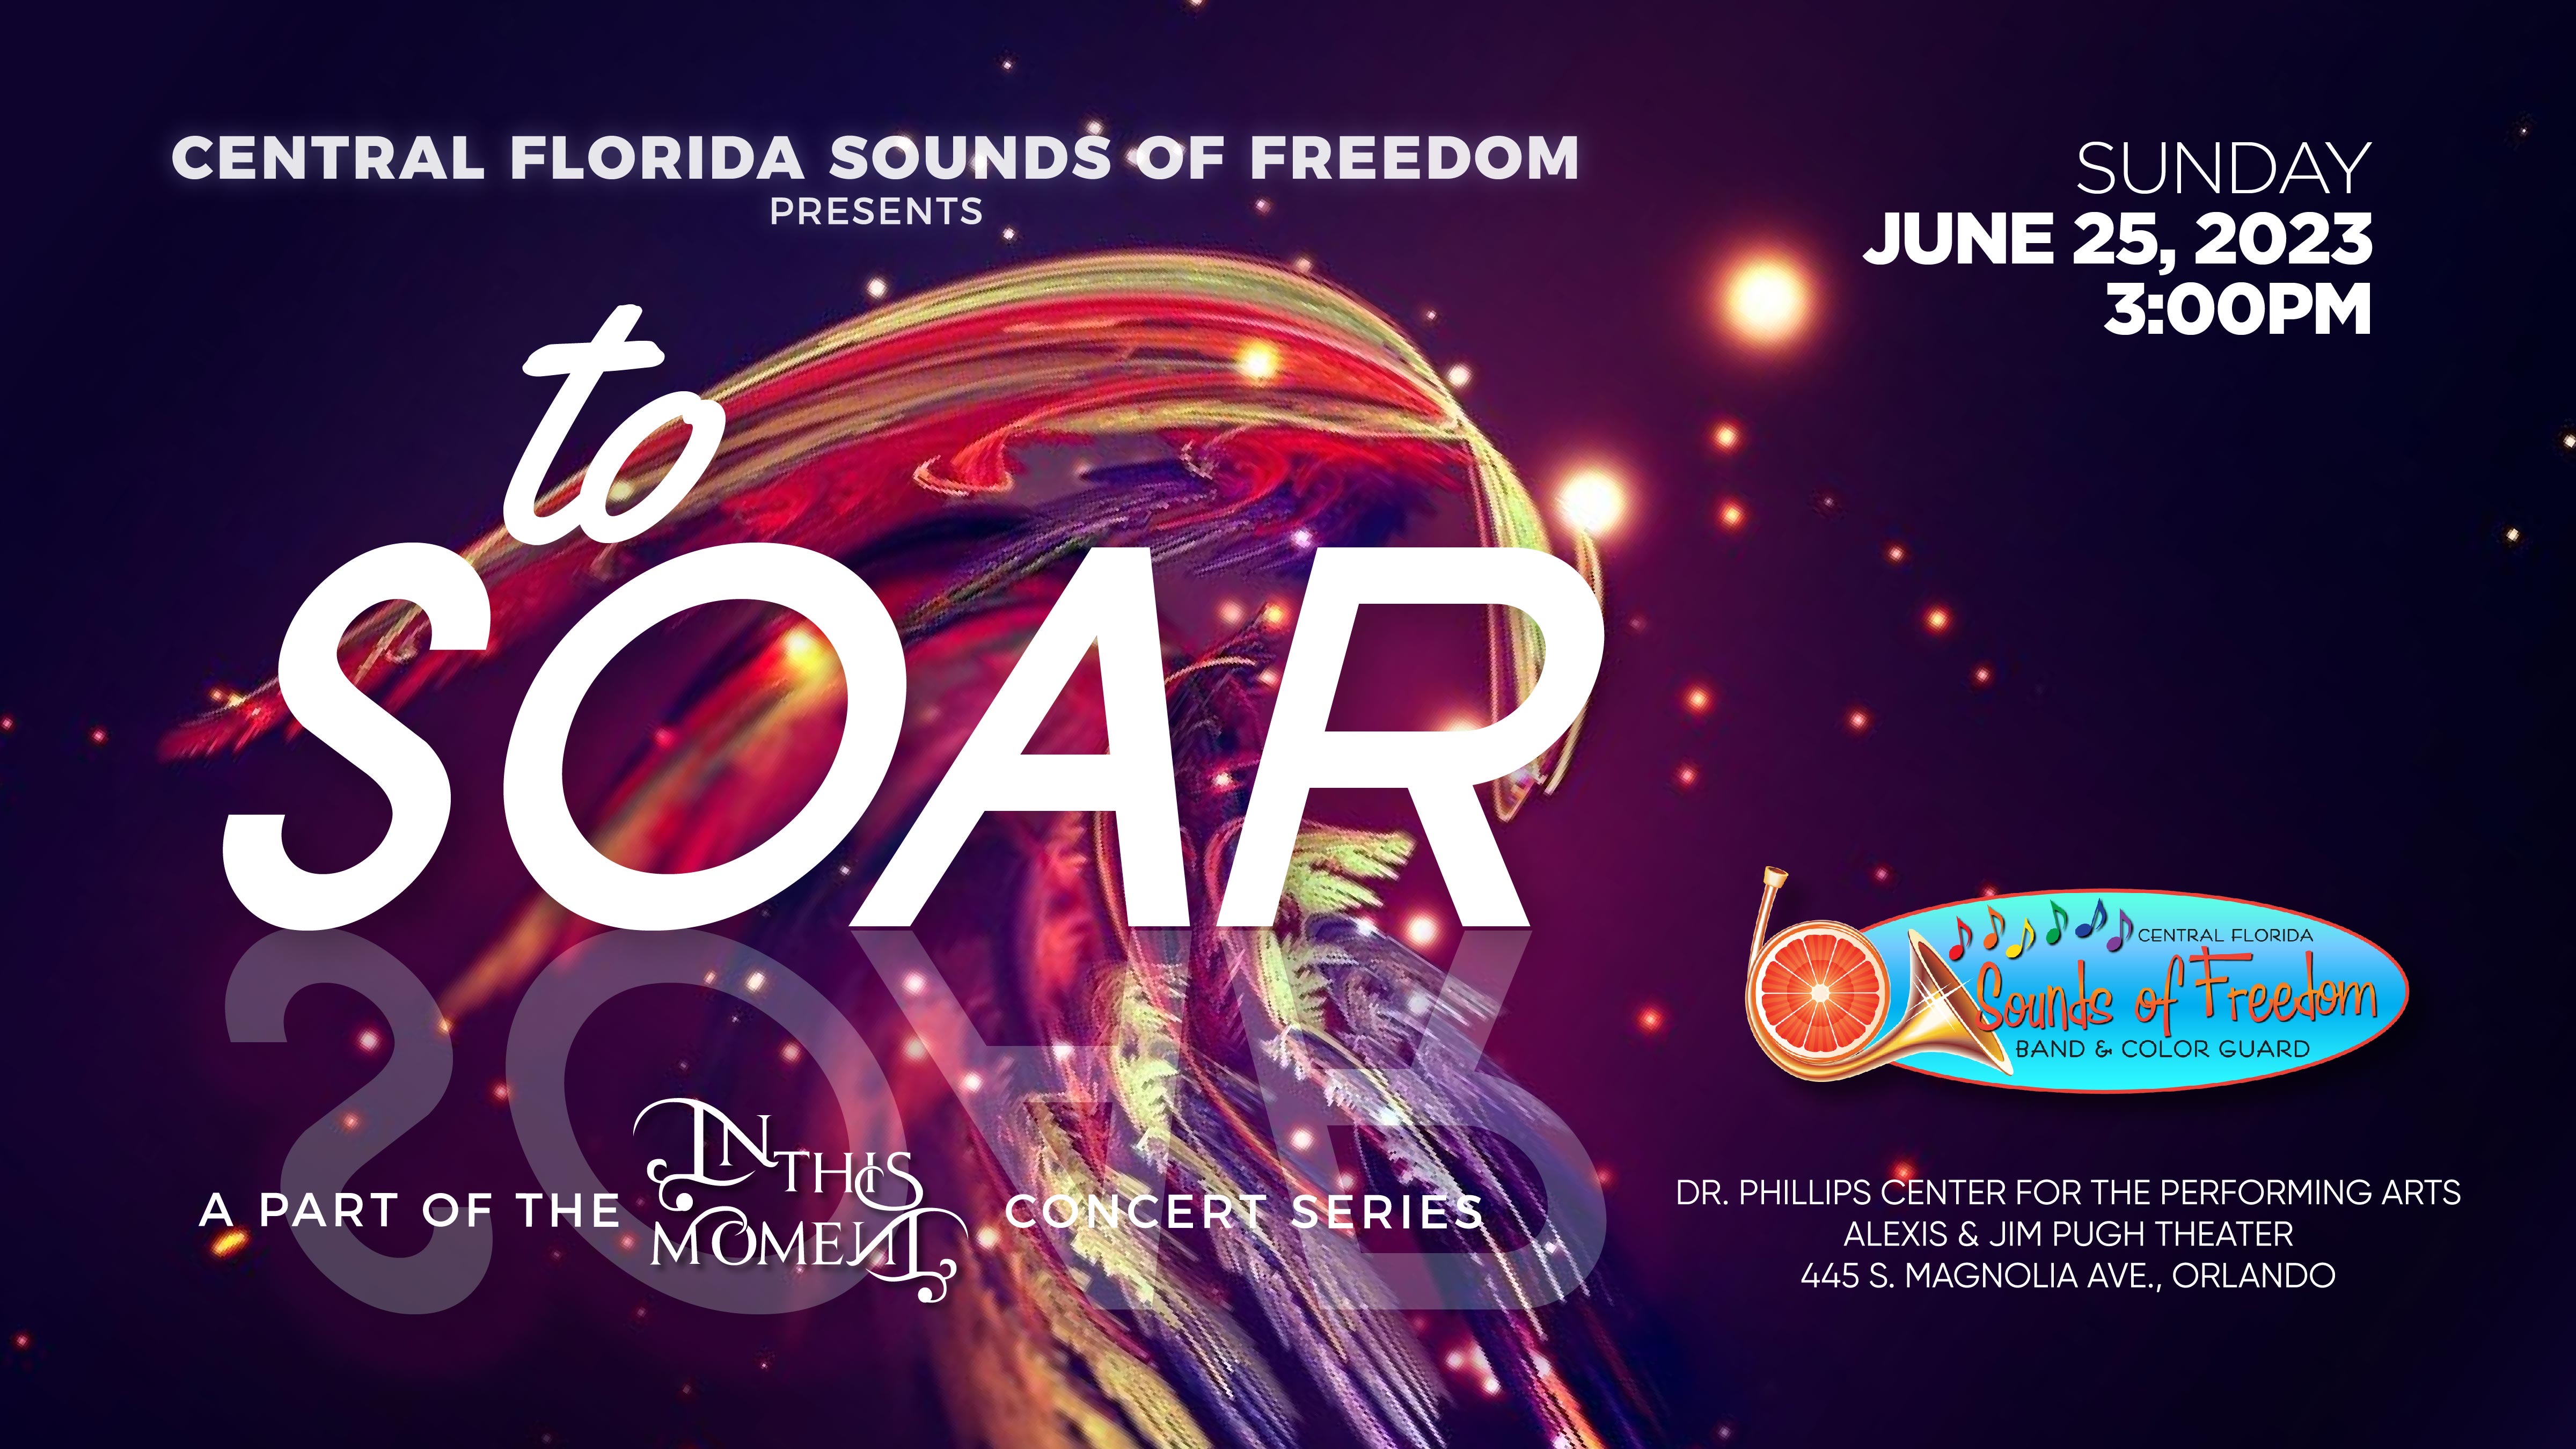 BUY CONCERT TICKETS!!! Central Florida Sounds of Freedom